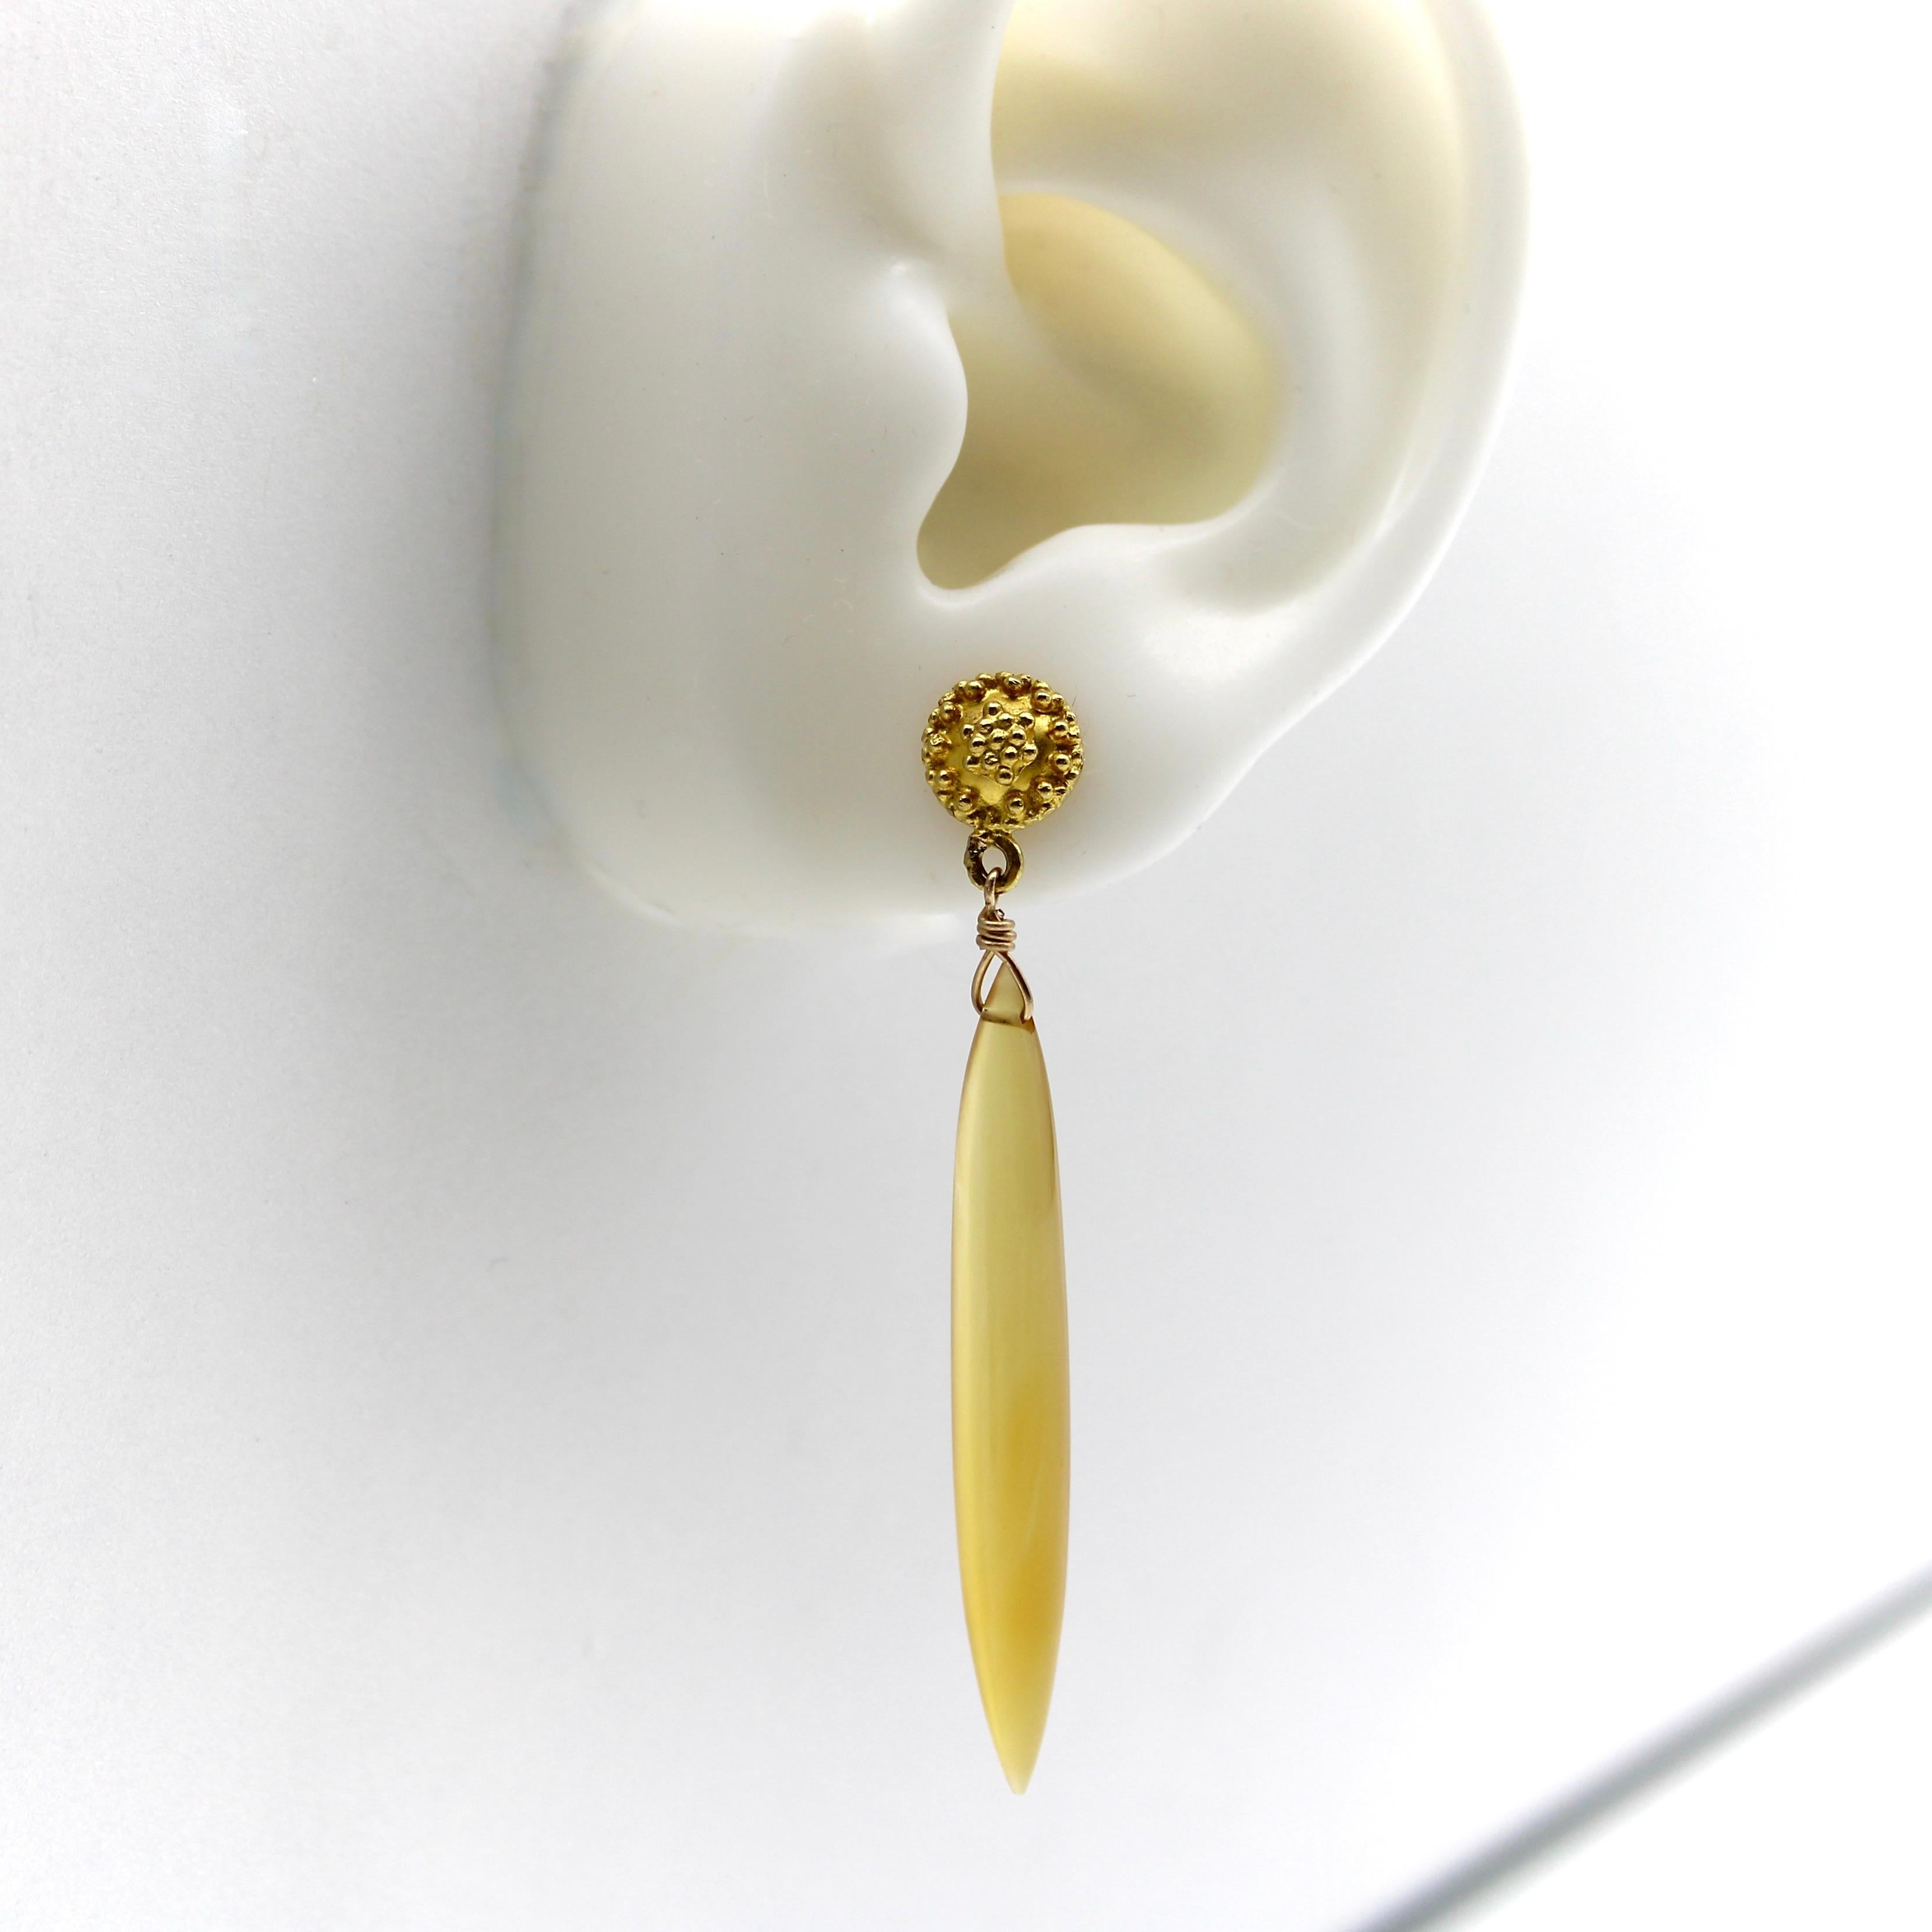 Part of Kirsten Corner’s Signature Line, this one-of-a-kind pair of drop earrings glow with a honey-colored amber hue that comes to life in both the 18k gold tops and the chalcedony gemstone torpedos that dangle below them. We found these vintage